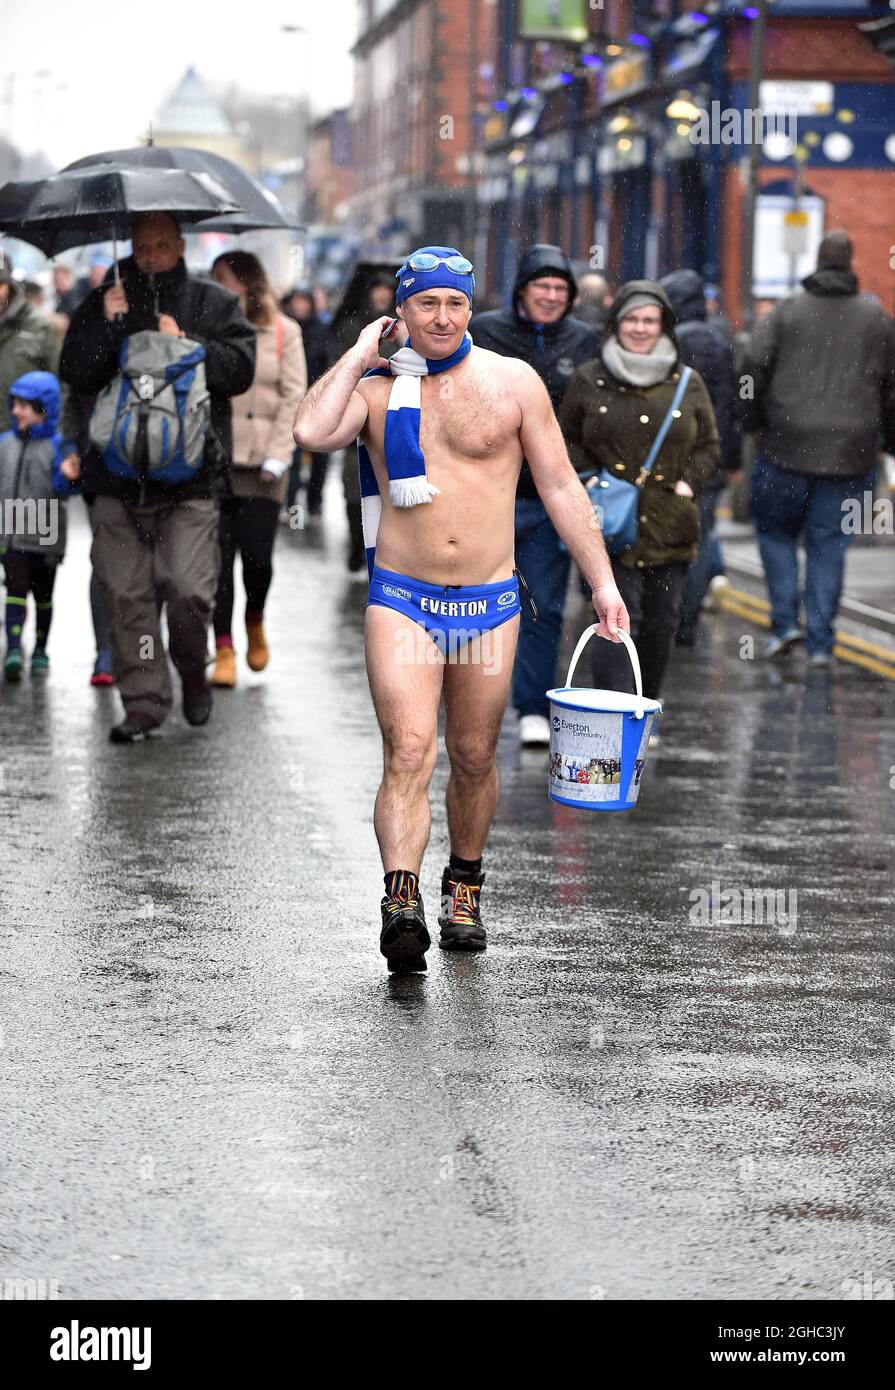 An Everton fan Speedo Mick walking in the rain outside Goodison Park before  the start of the premier league match at Goodison Park Stadium, Liverpool.  Picture date 6th April 2018. Picture credit